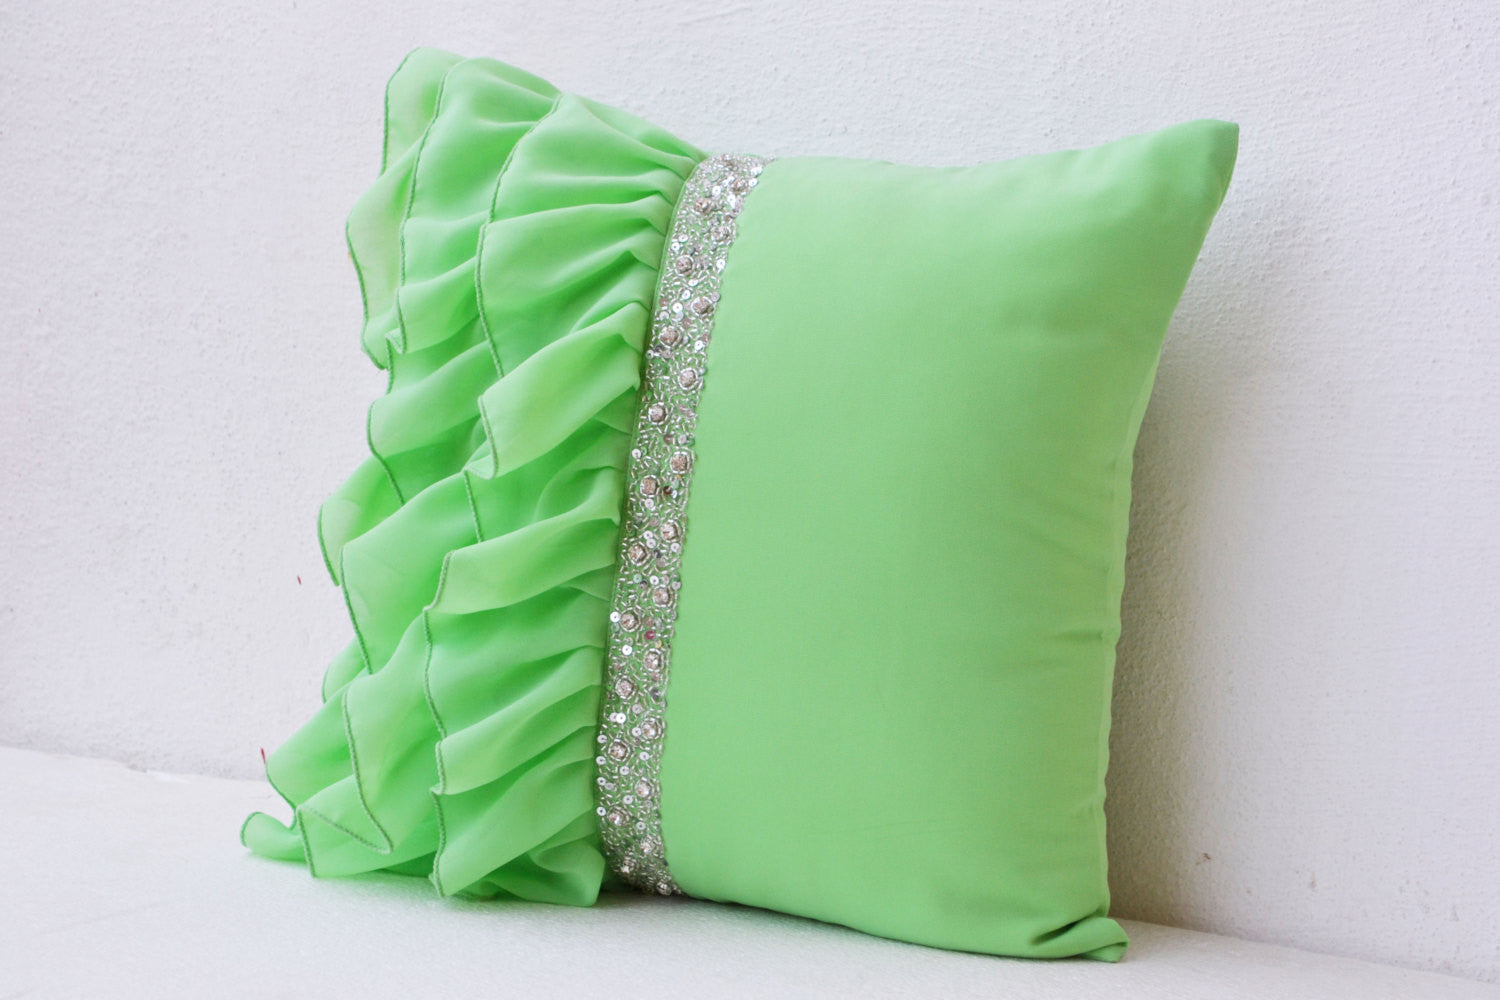 Handmade green throw pillows with ruffles and sequin